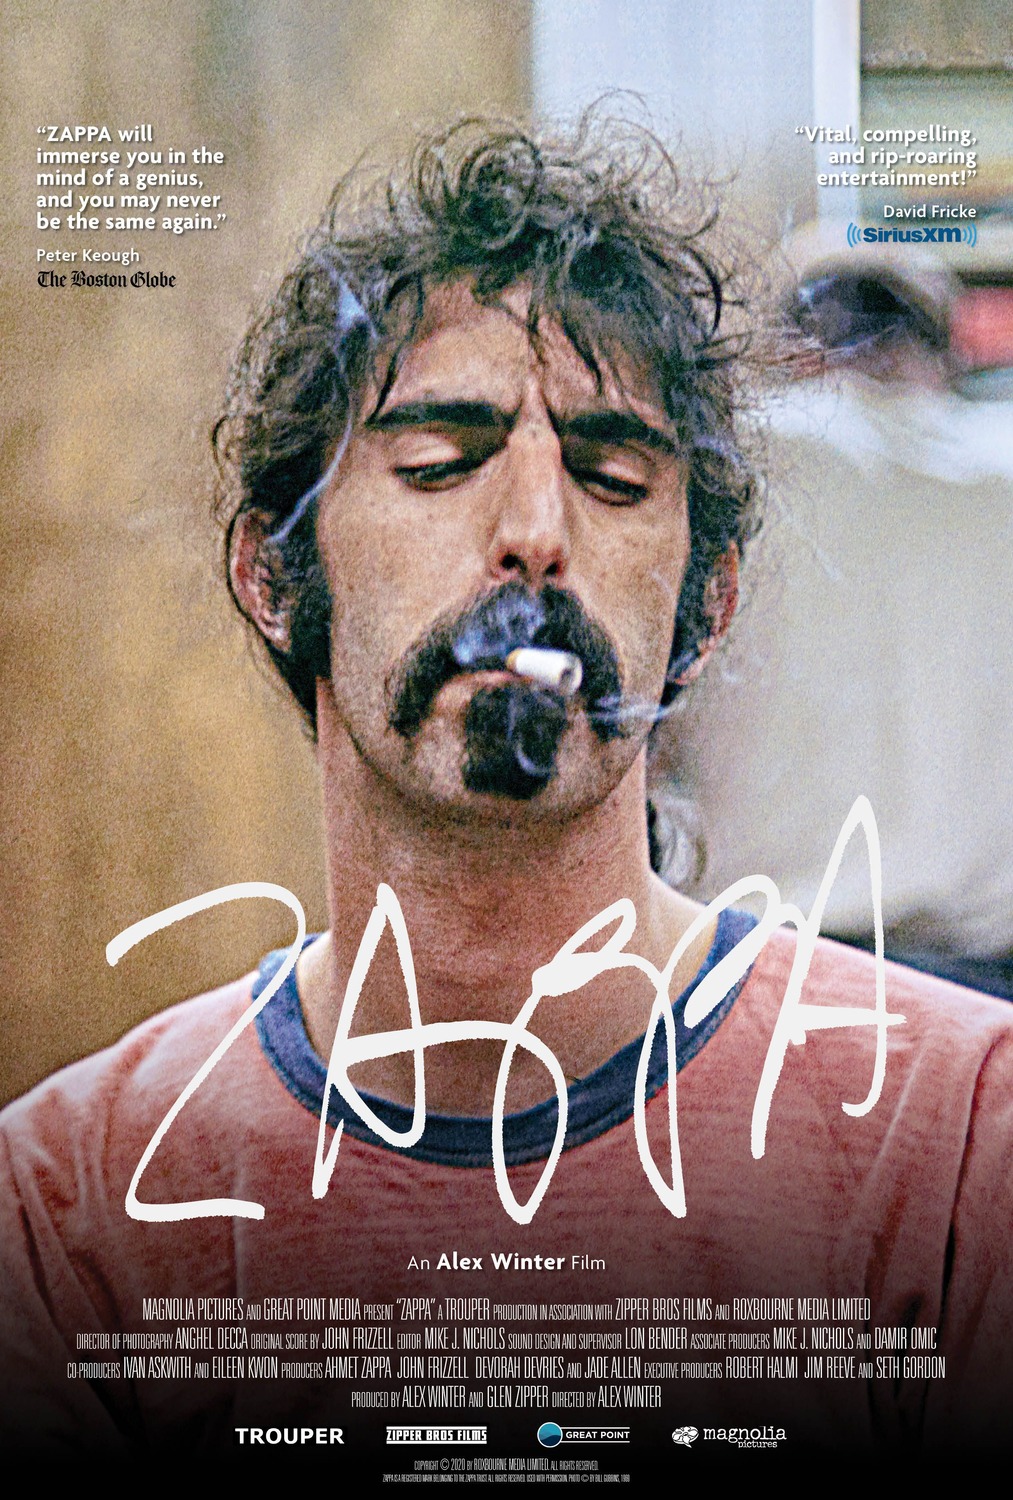 Extra Large Movie Poster Image for Zappa 